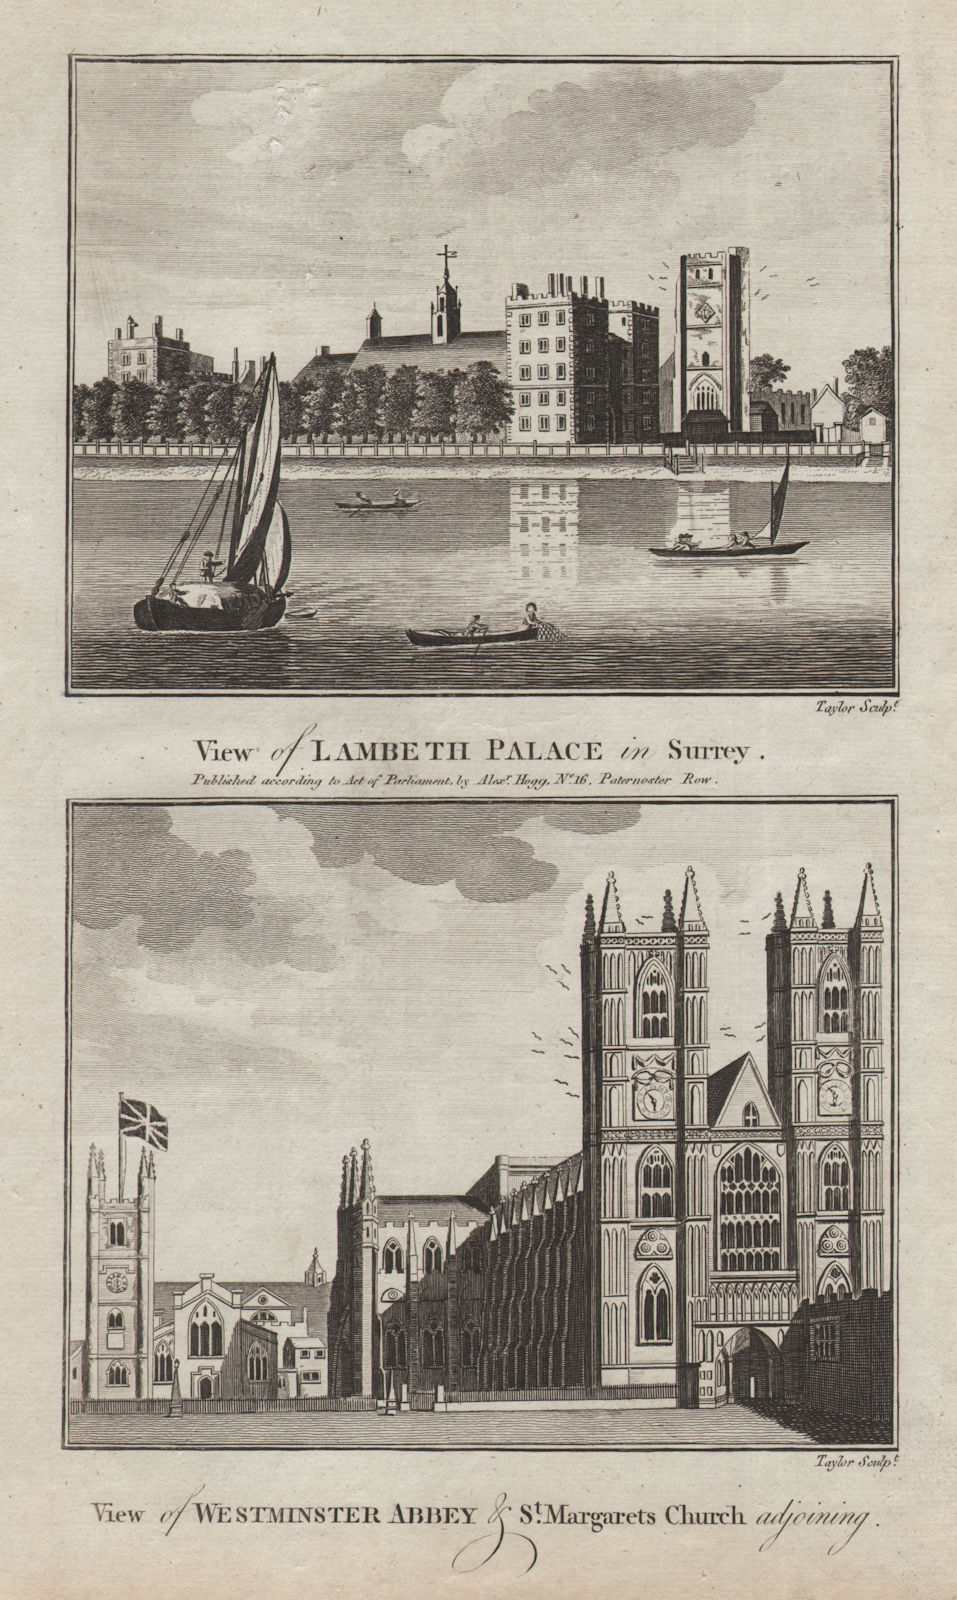 Associate Product Lambeth Palace. Westminster Abbey & St. Margaret's Church. THORNTON 1784 print